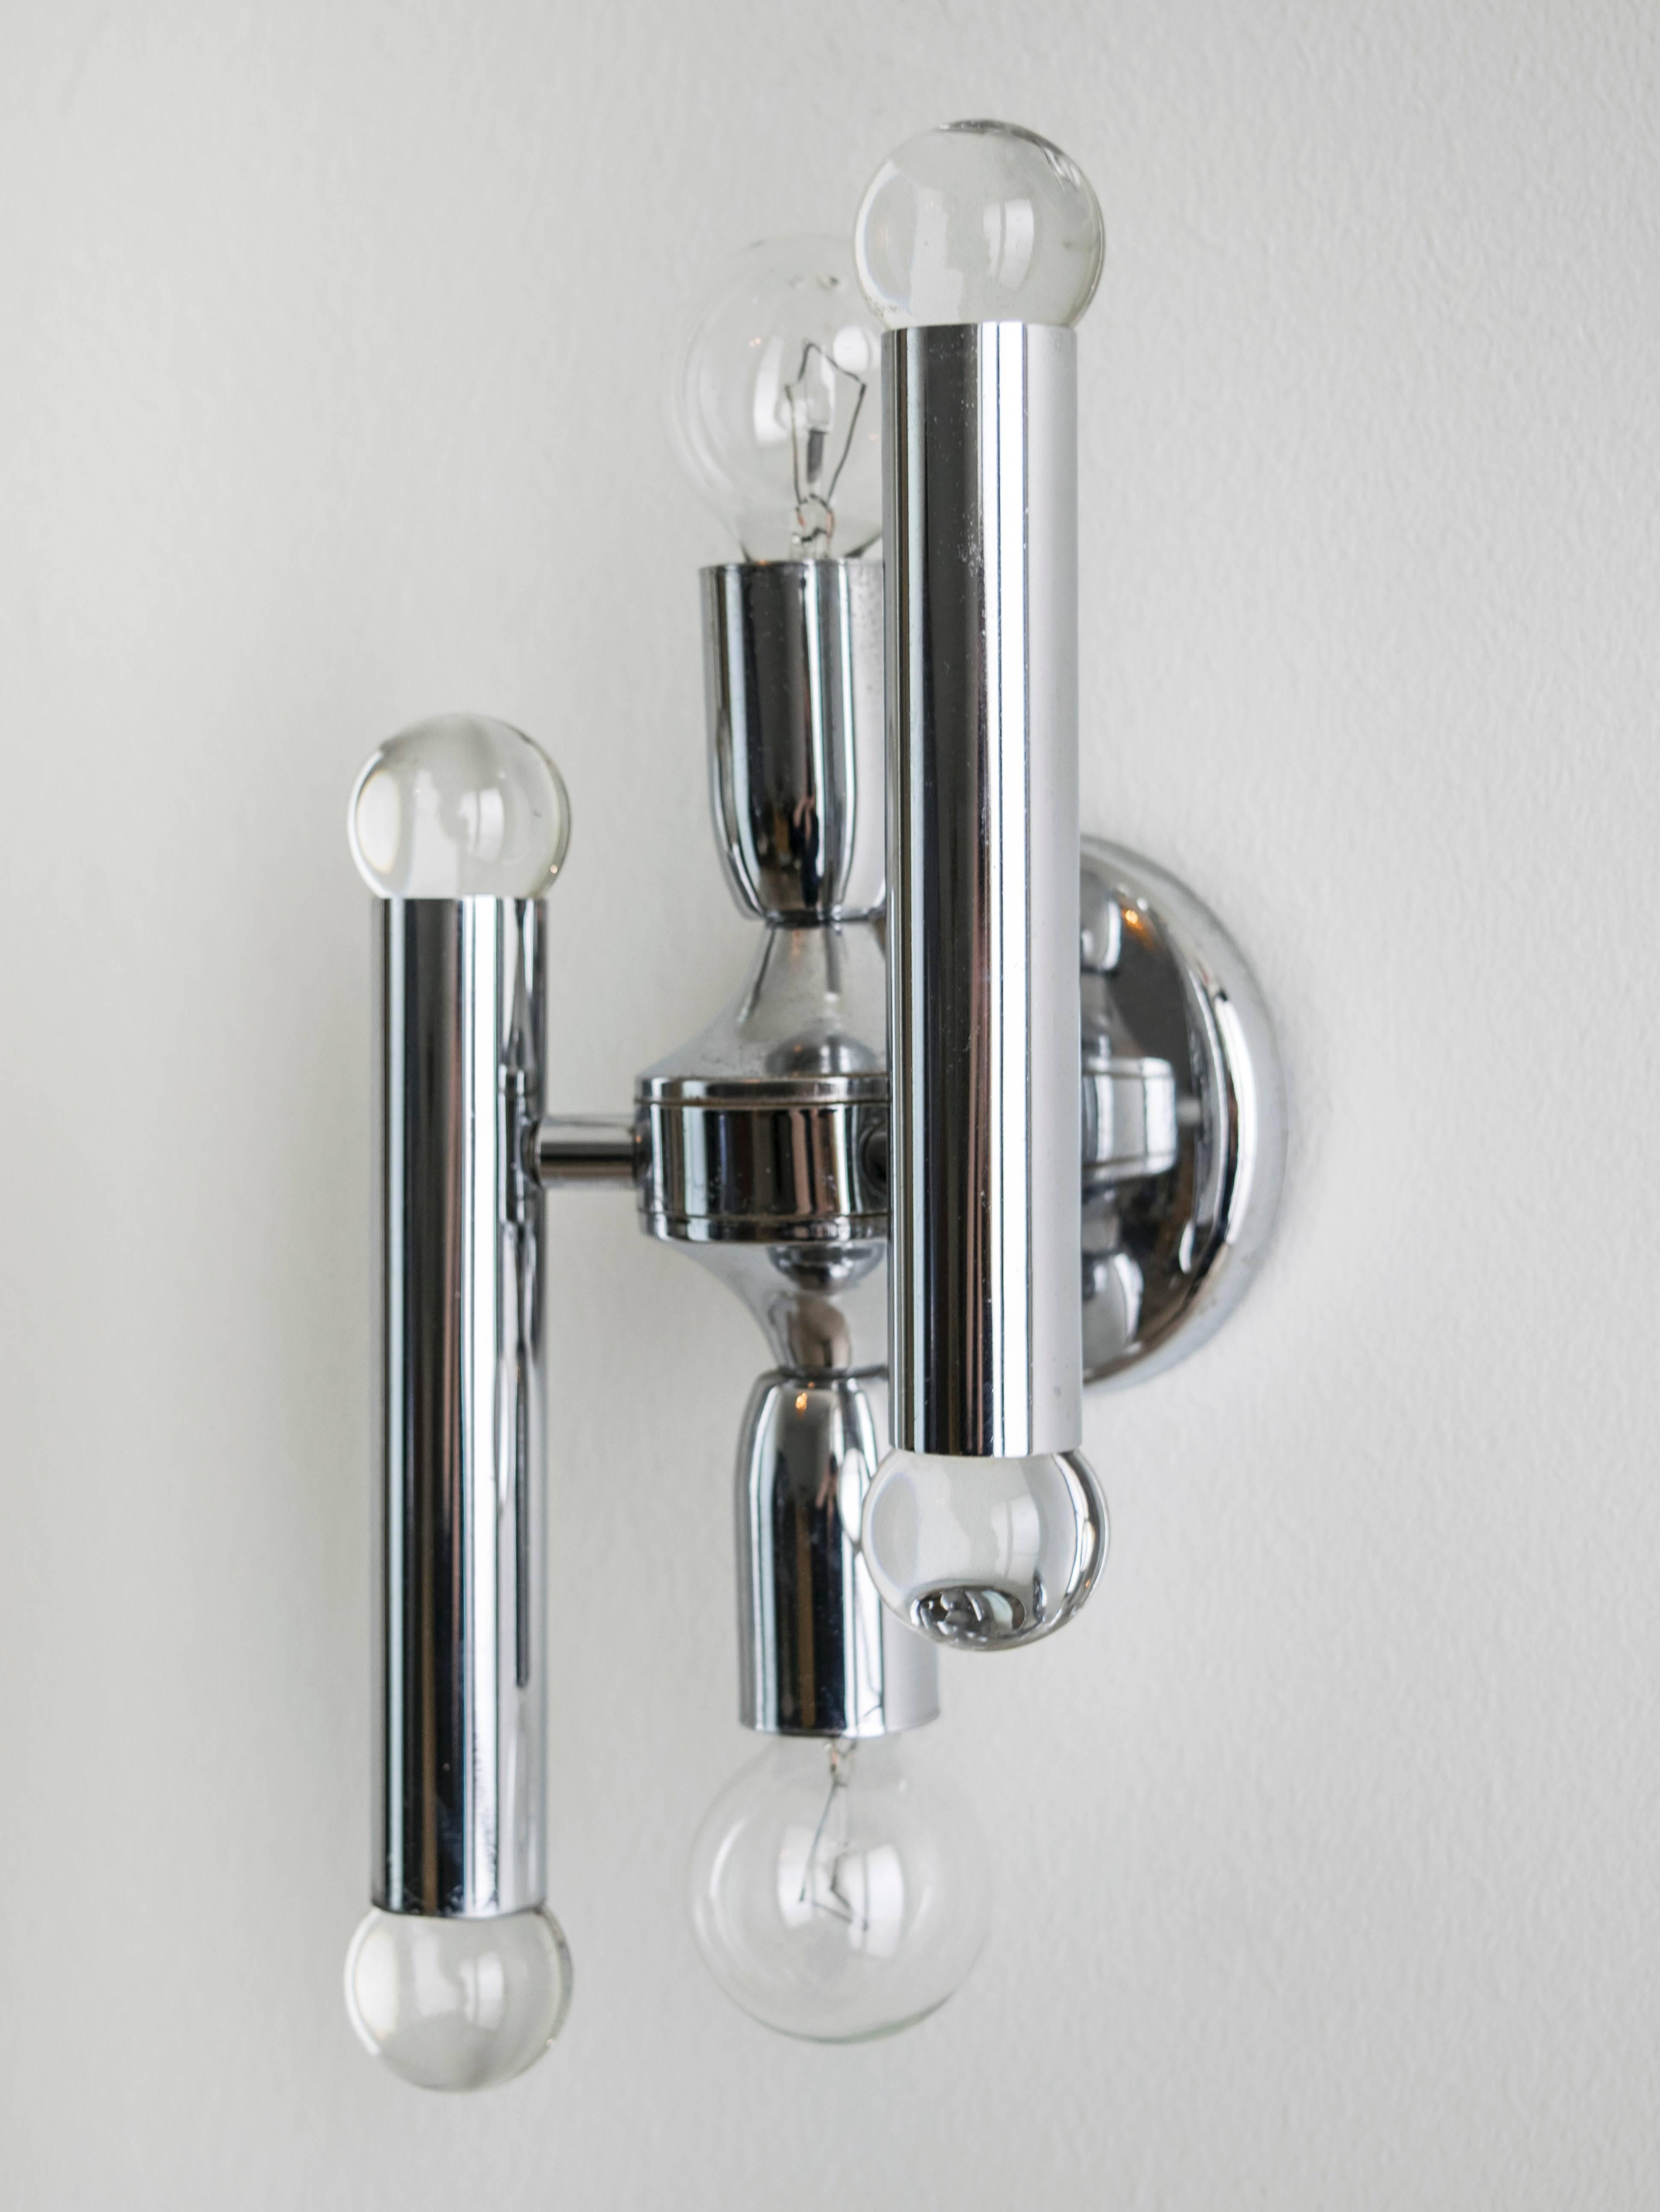 Iconic Sciolari design featuring sconces with baton chrome and crystal end caps with a center light fixture of one up and one down.